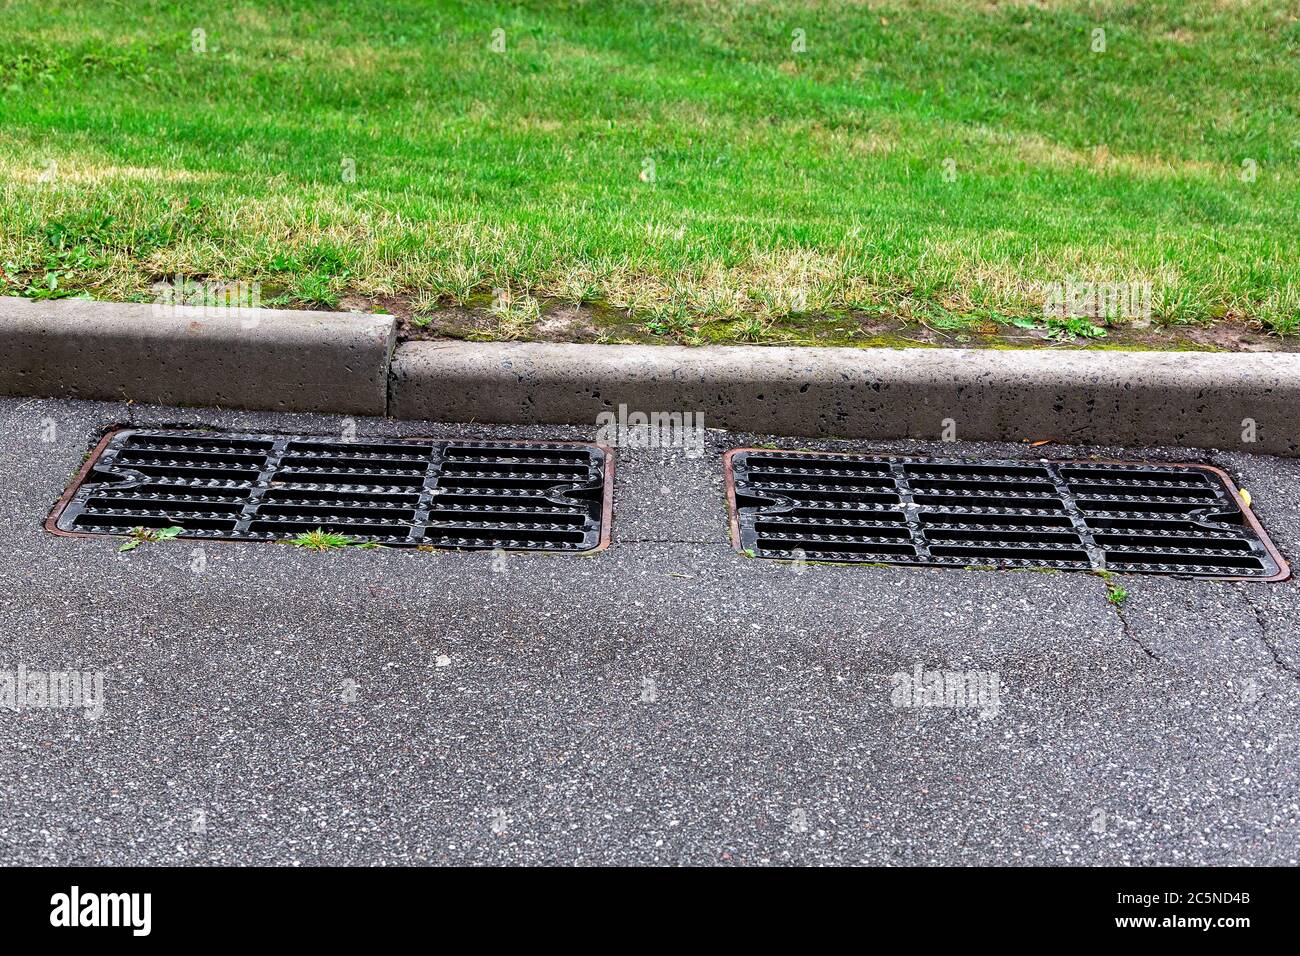 two grilles of a sewer manhole of a storm road system on the slope of an asphalt road with green grass in the background. Stock Photo